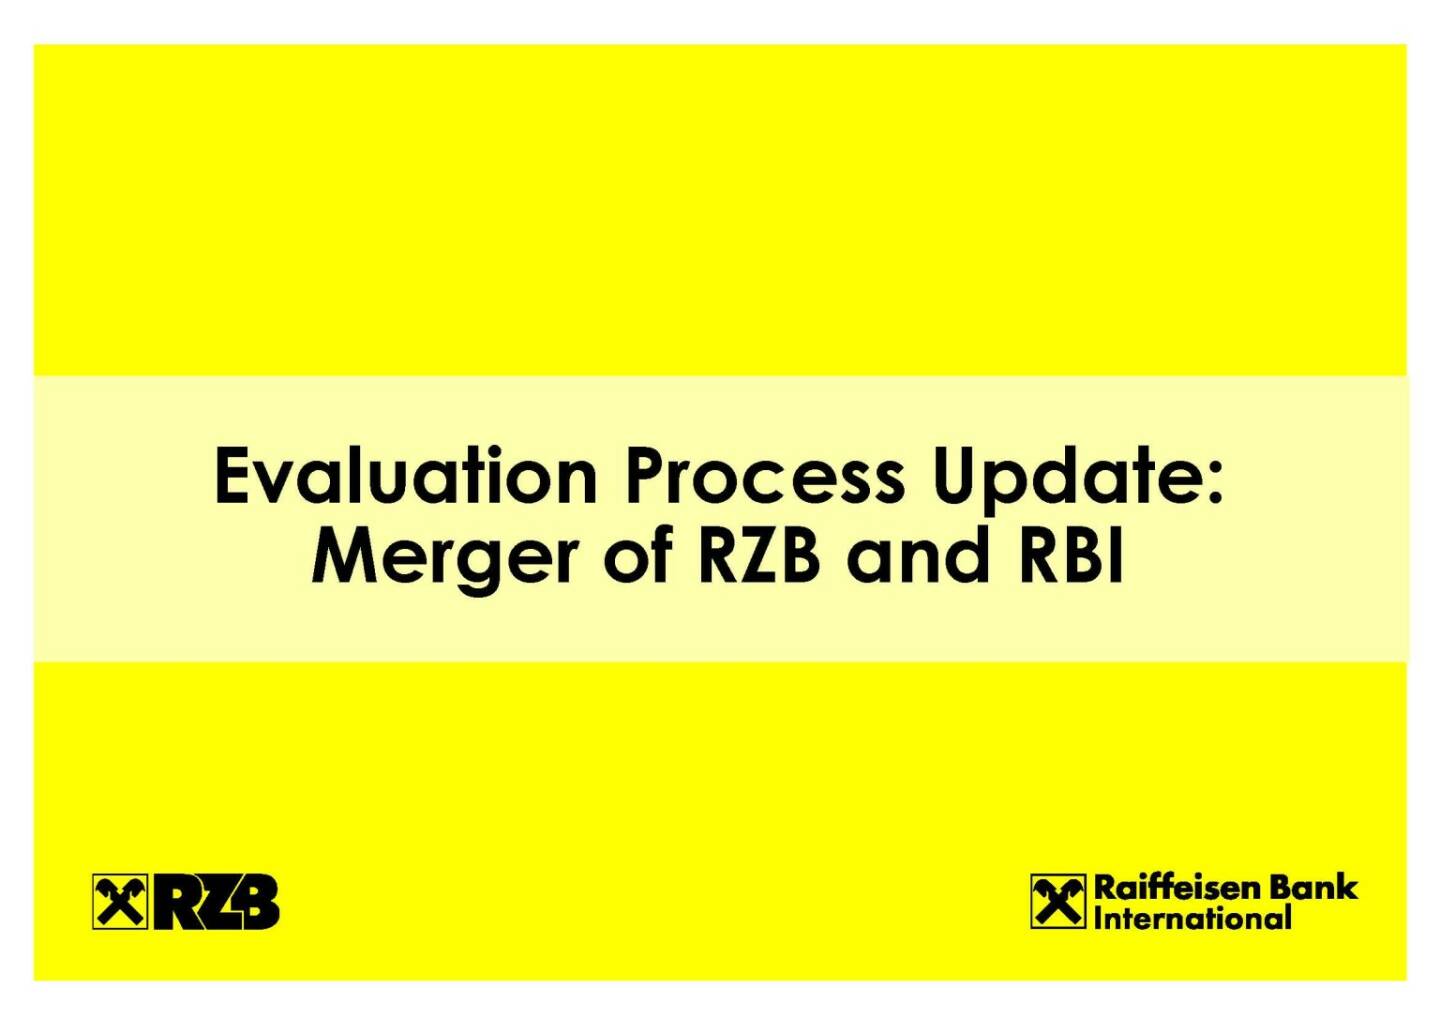 Evaluation Process Update: Merger of RZB and RBI